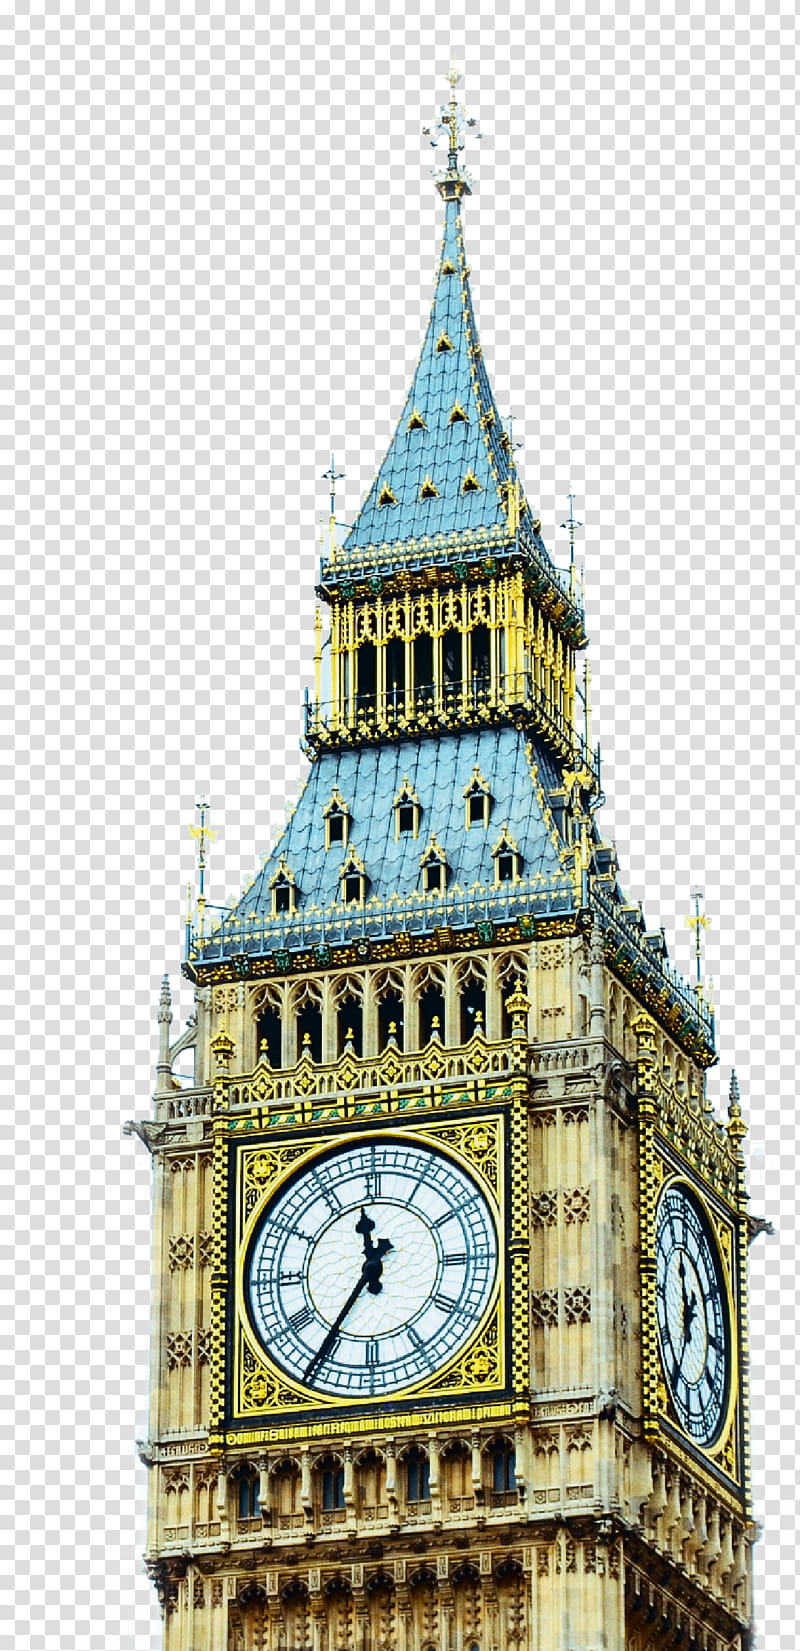 clock tower landmark tower clock architecture, Steeple, Spire, Building, Medieval Architecture, Classical Architecture, Listed Building, Wall Clock transparent background PNG clipart